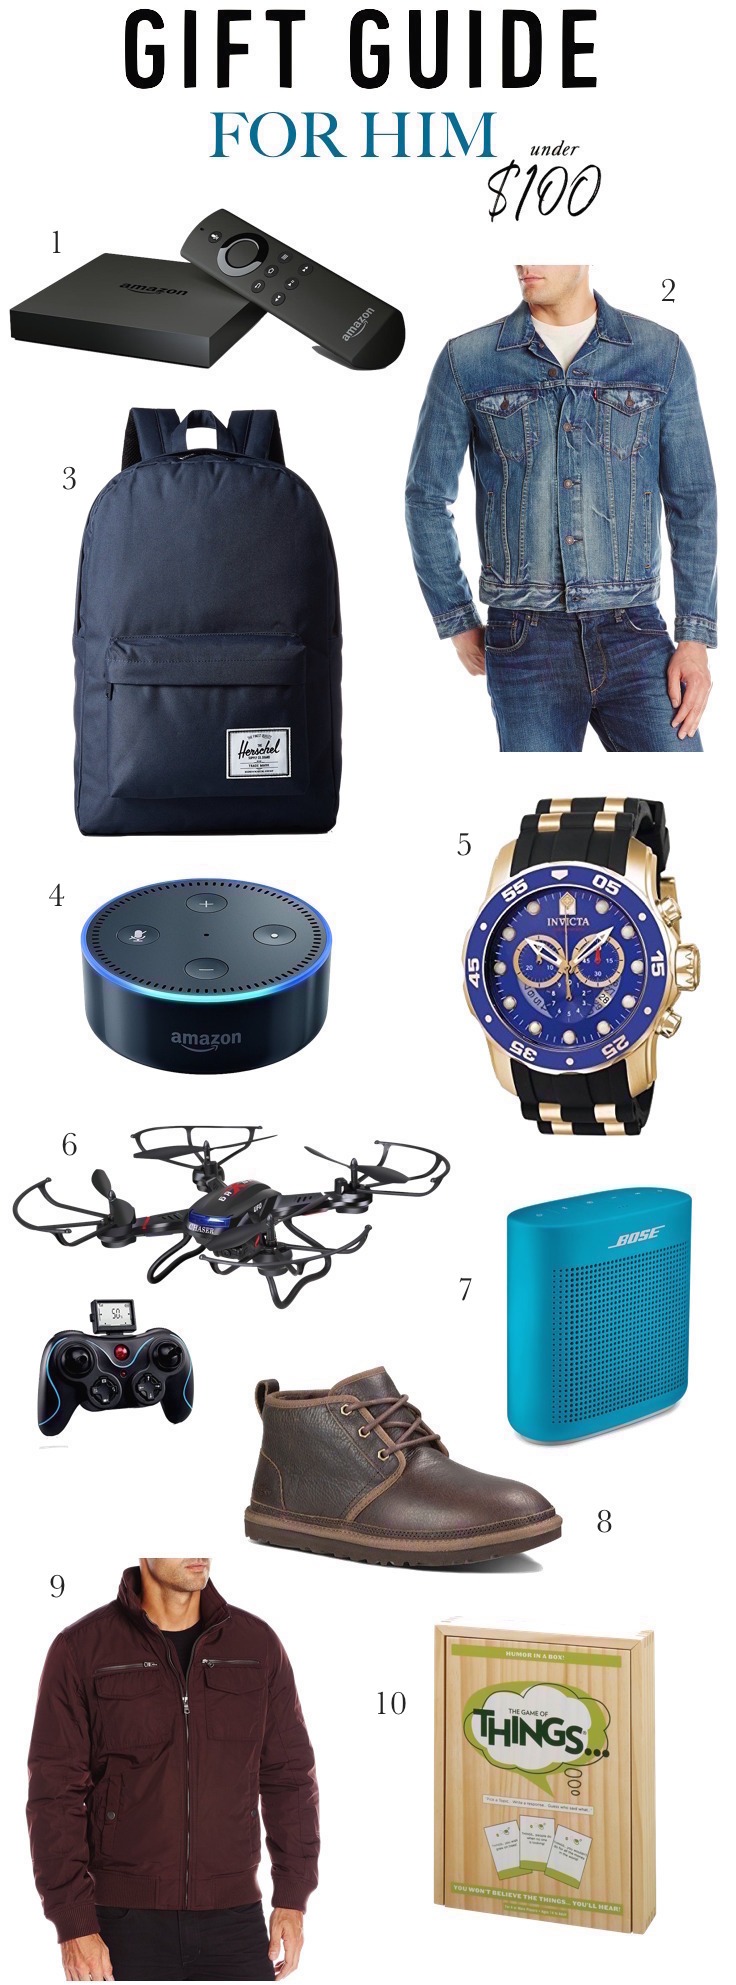 Looking for Christmas gift ideas for your husband, dad, boyfriend or brother? Click to see 20 stylish, useful and affordable holiday gift ideas for him that are sure to please! 